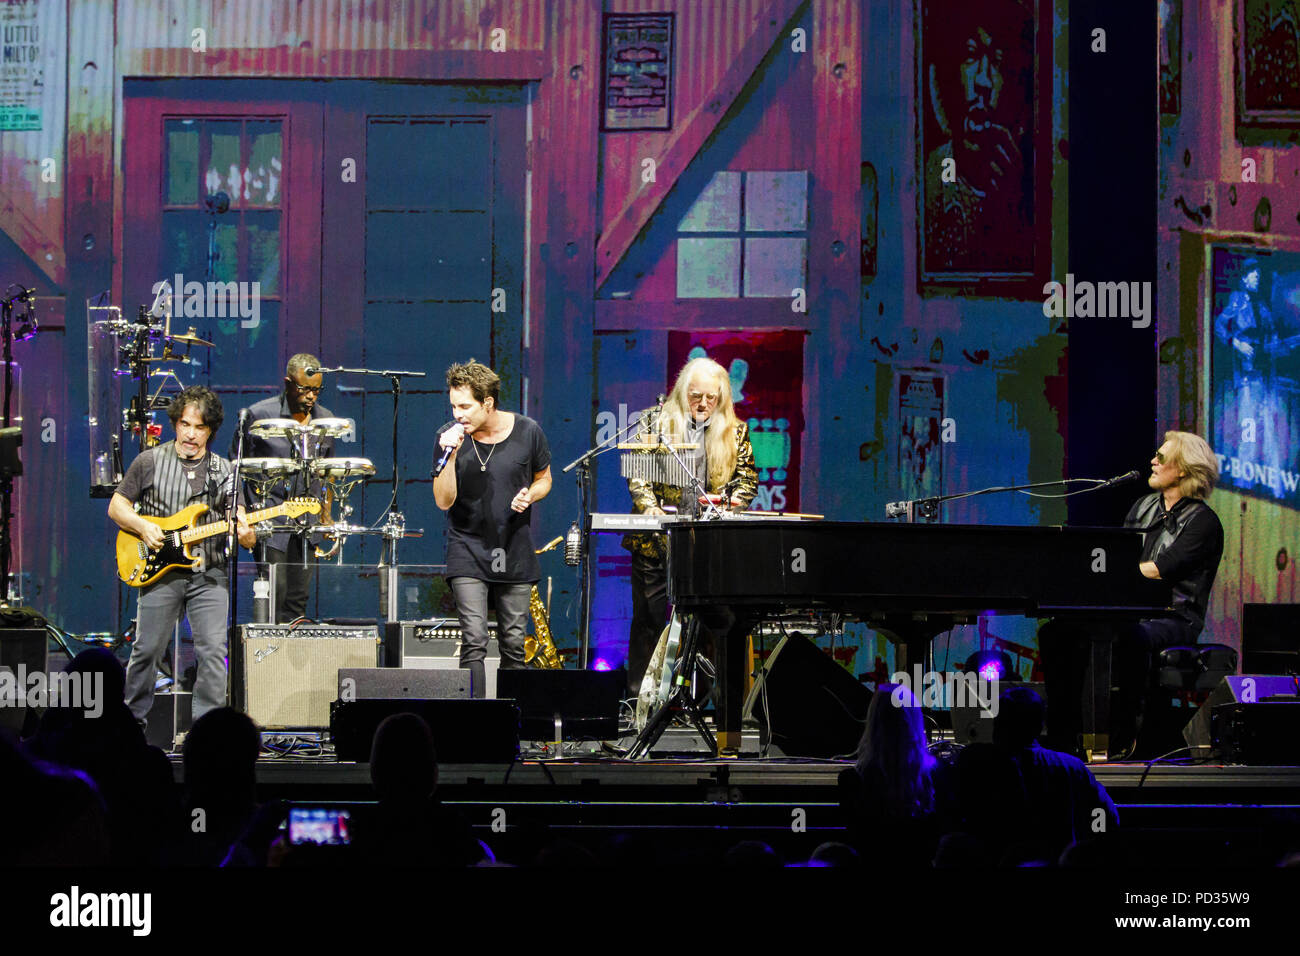 San Diego, California, USA. 4th Aug, 2018. PAT MONAHAN (C) joins DARYL HALL (R) and JOHN OATES (L) on stage at Viejas Arena in San Diego, California on August 4, 2018 Credit: Marissa Carter/ZUMA Wire/Alamy Live News Stock Photo